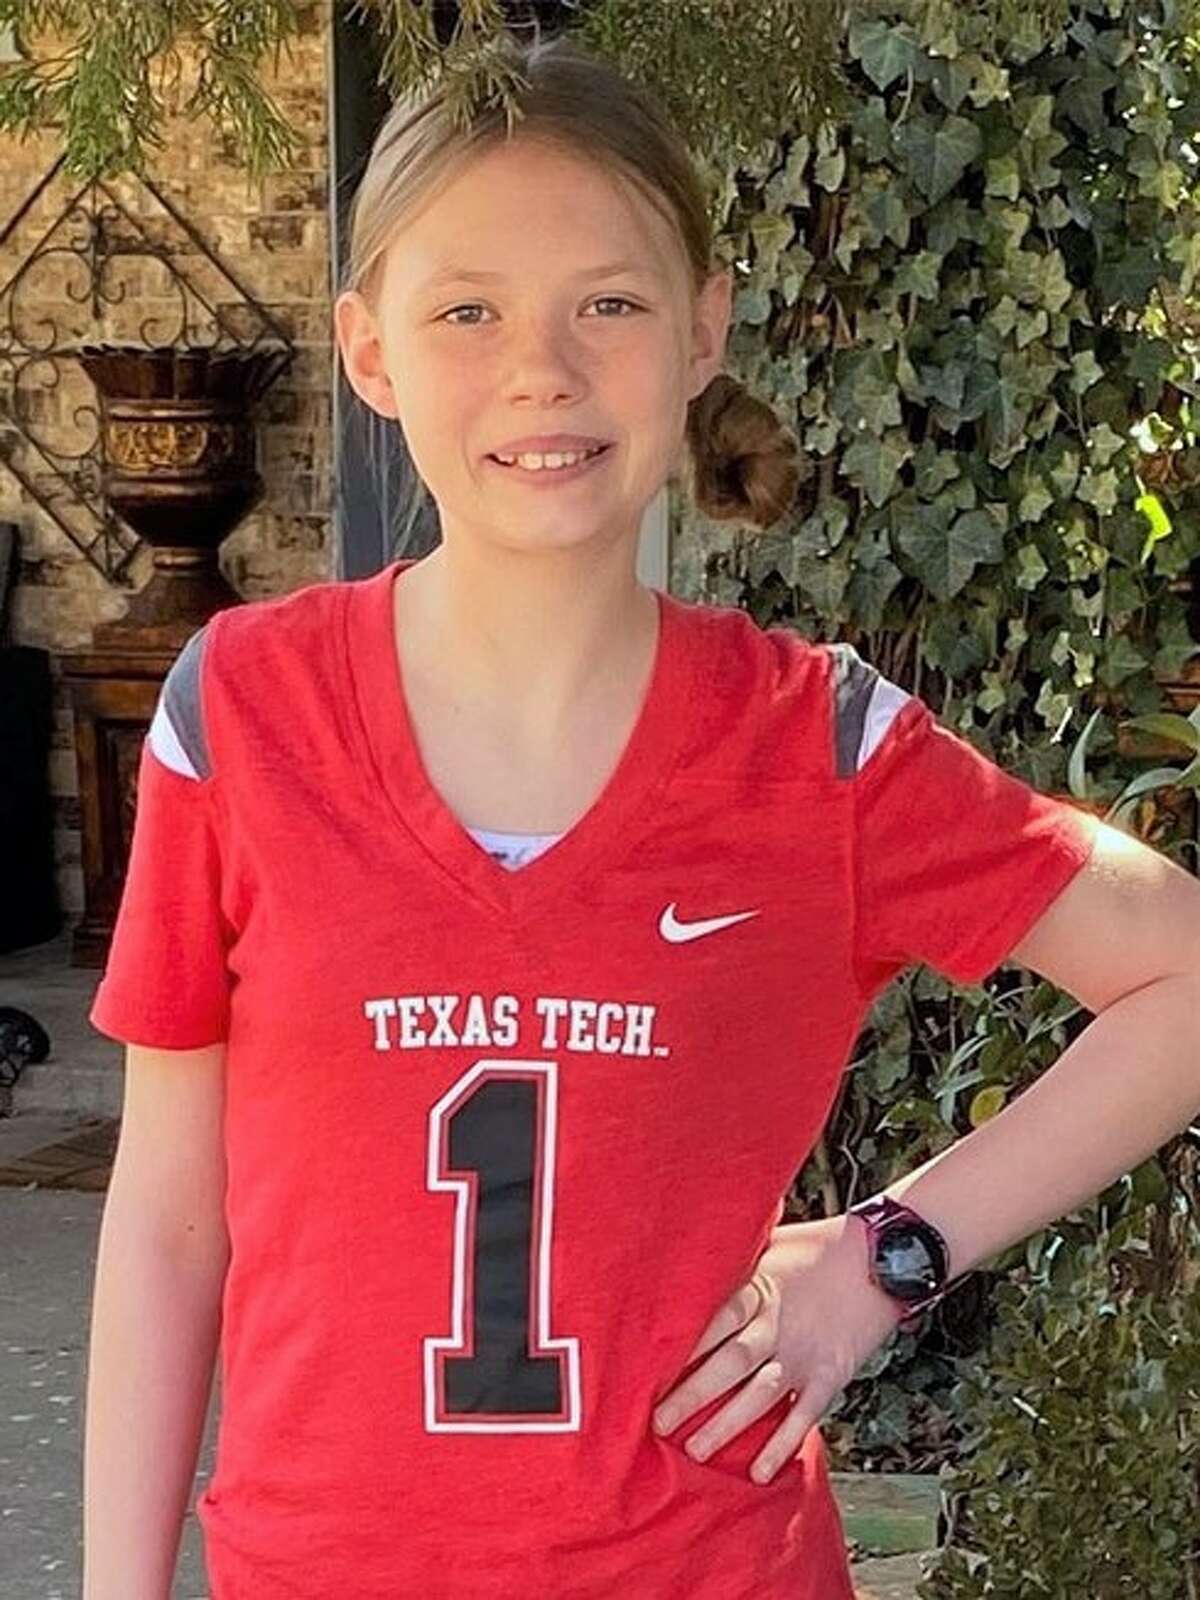 Kristen is among the children listed on the Texas Adoption Resource Exchange (TARE) website. Visit https://www.dfps.state.tx.us/Application/TARE/Home.aspx/Default for more details.